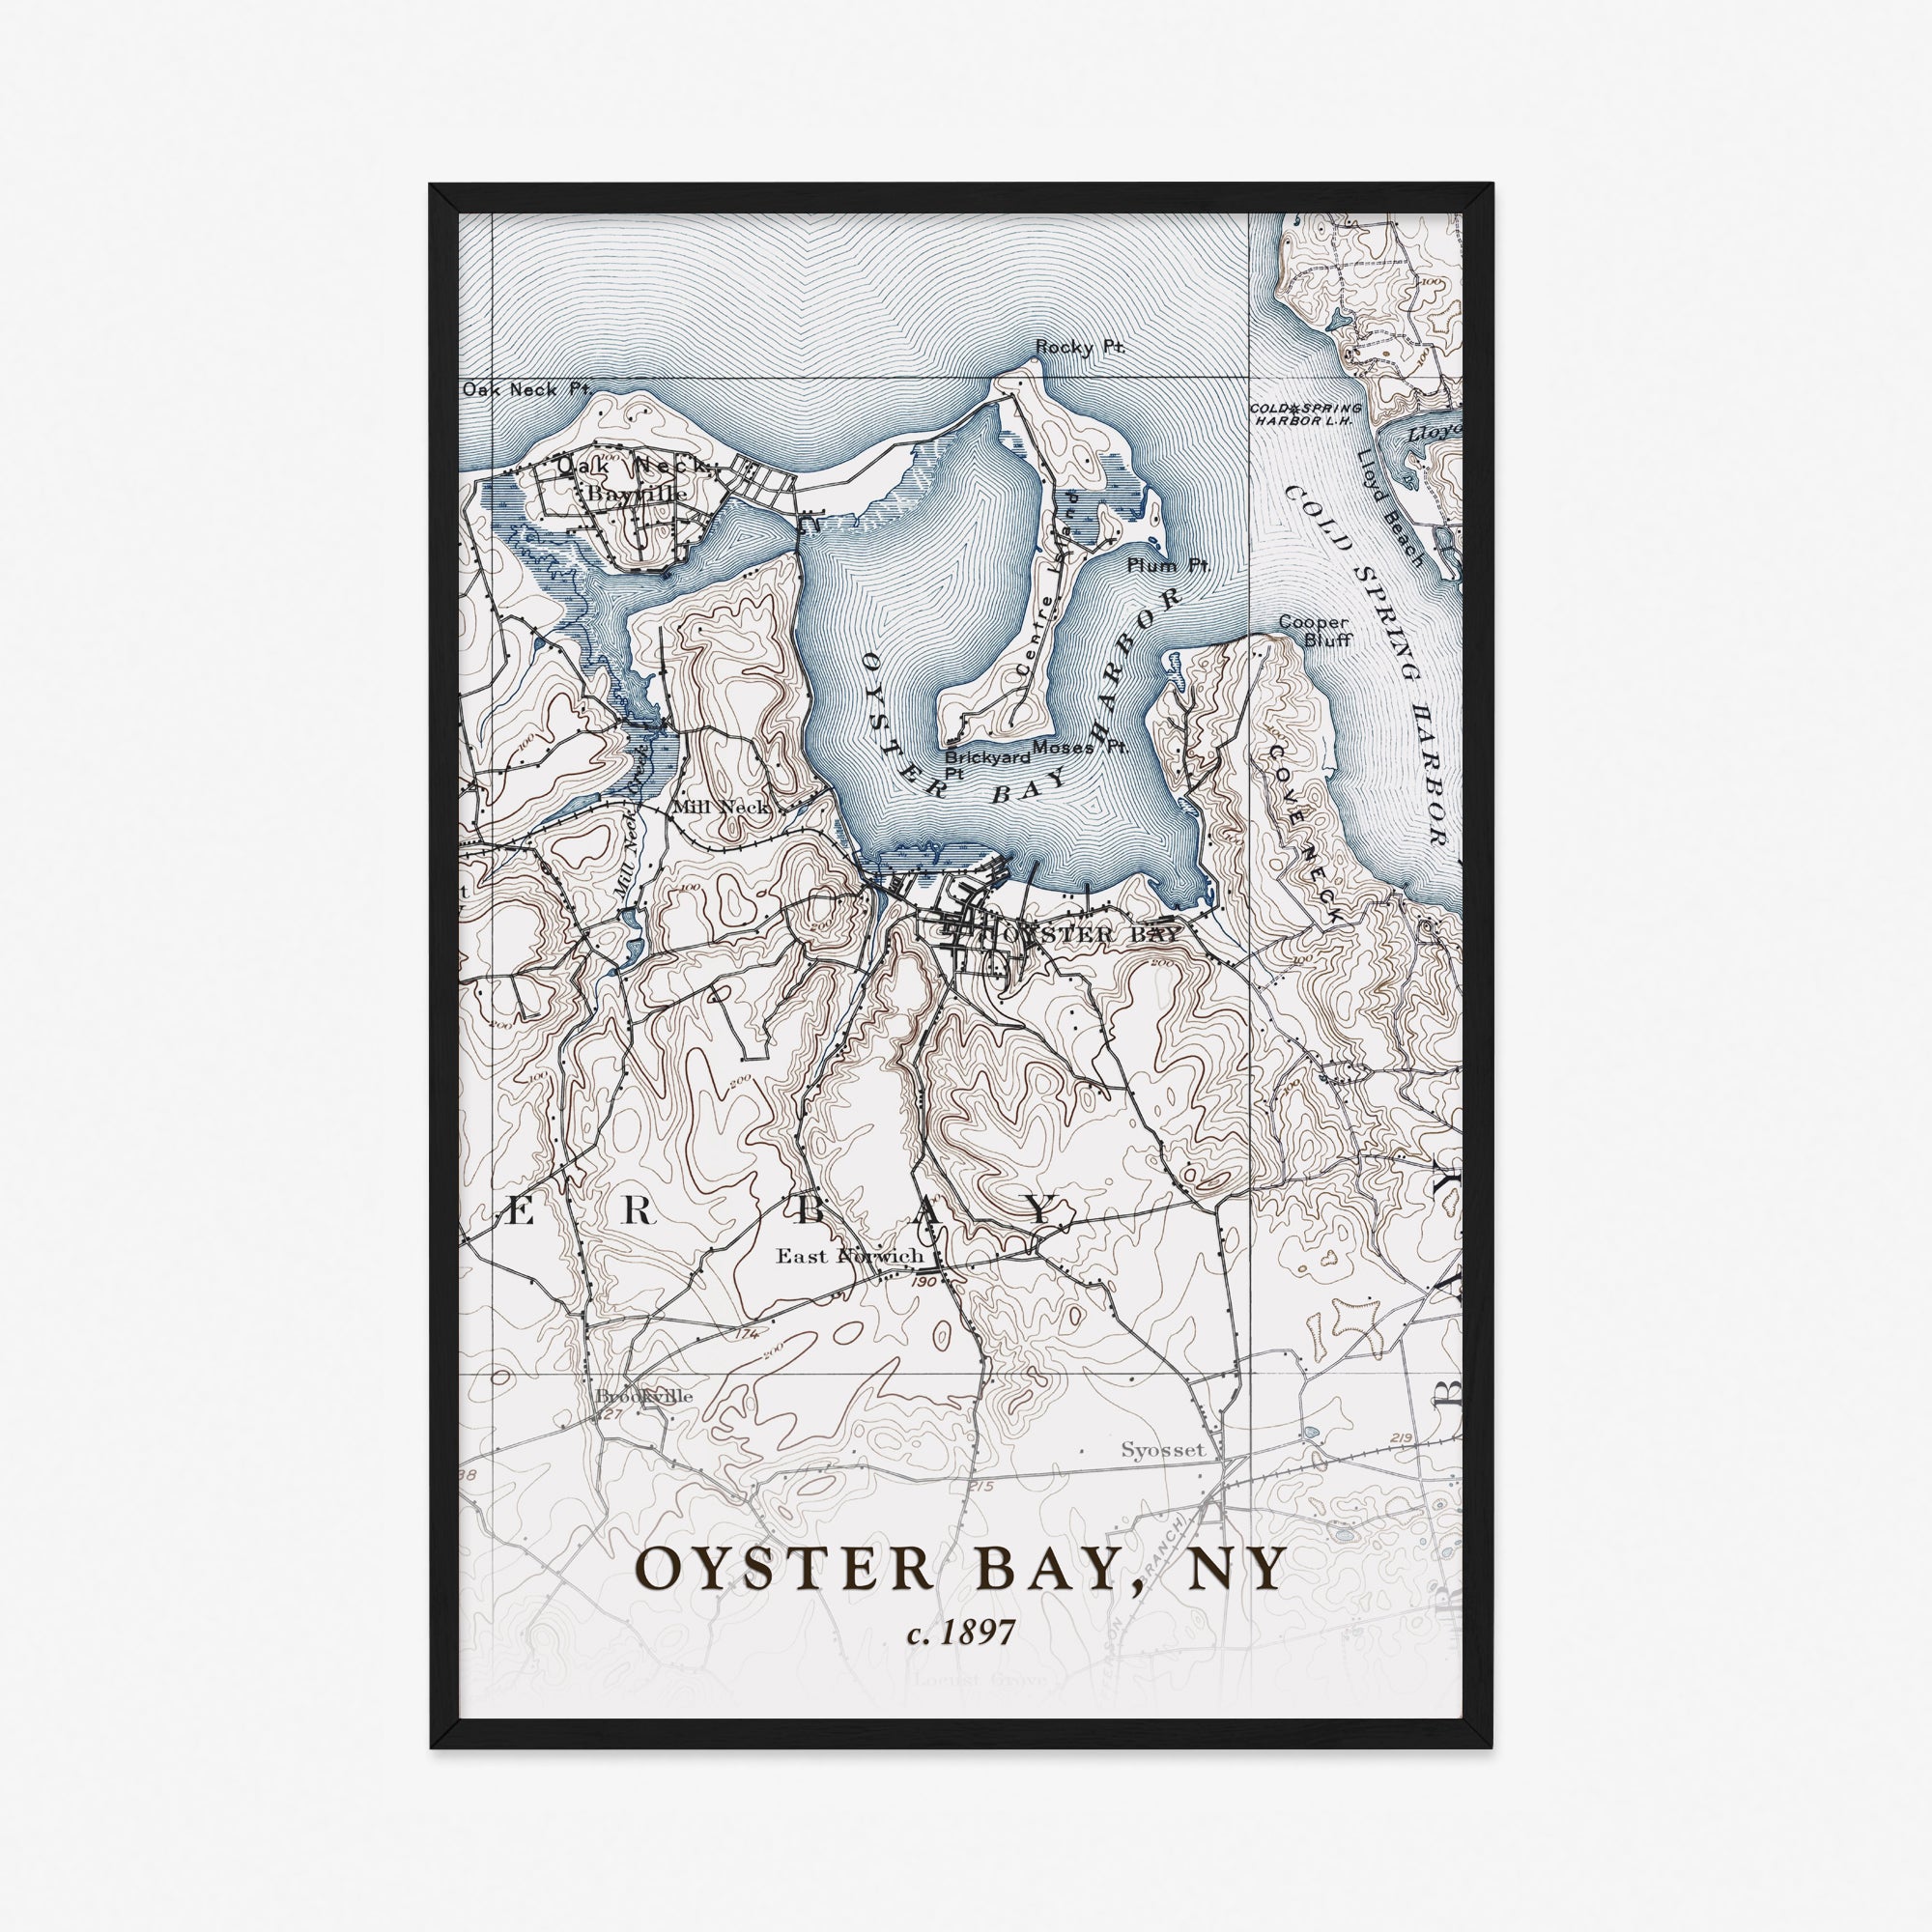 Oyster Bay, NY - 1897 Topographic Map